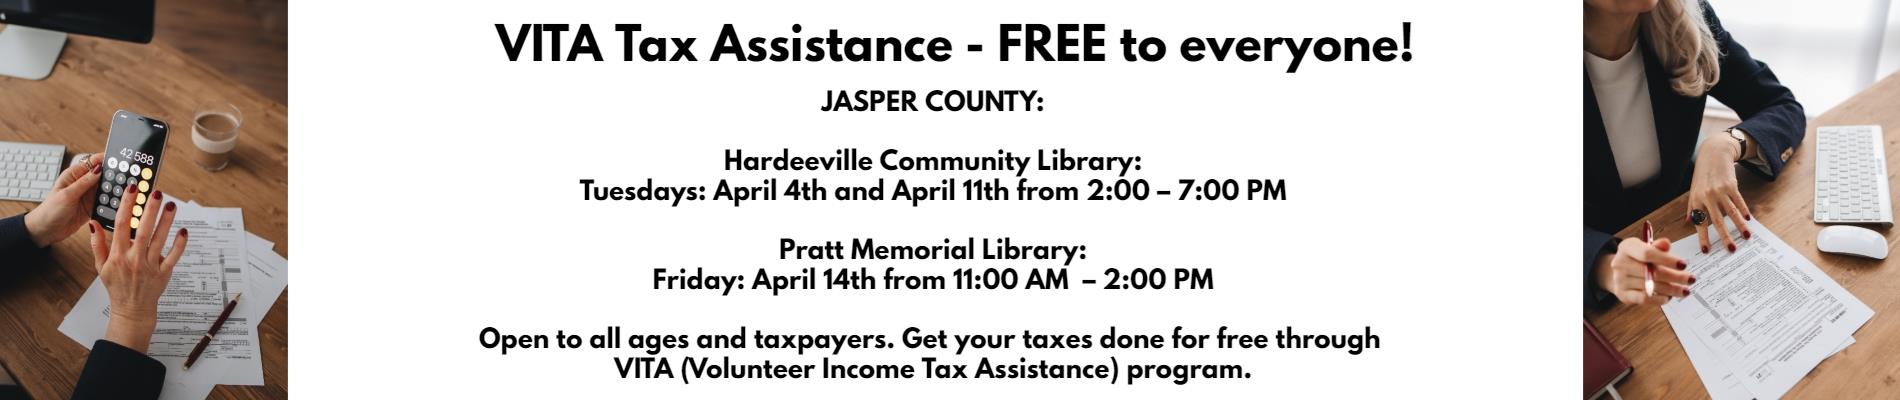 VITA Tax Assistance – FREE to everyone!!  JASPER COUNTY:  Hardeeville Community Library:  Tuesdays: April 4th and April 11th from 2:00 – 7:00 PM     Pratt Memorial Library:  Friday: April 14th from 11:00 AM  – 2:00 PM     Open to all ages and taxpayers. Get your taxes done for free through VITA (Volunteer Income Tax Assistance) program.